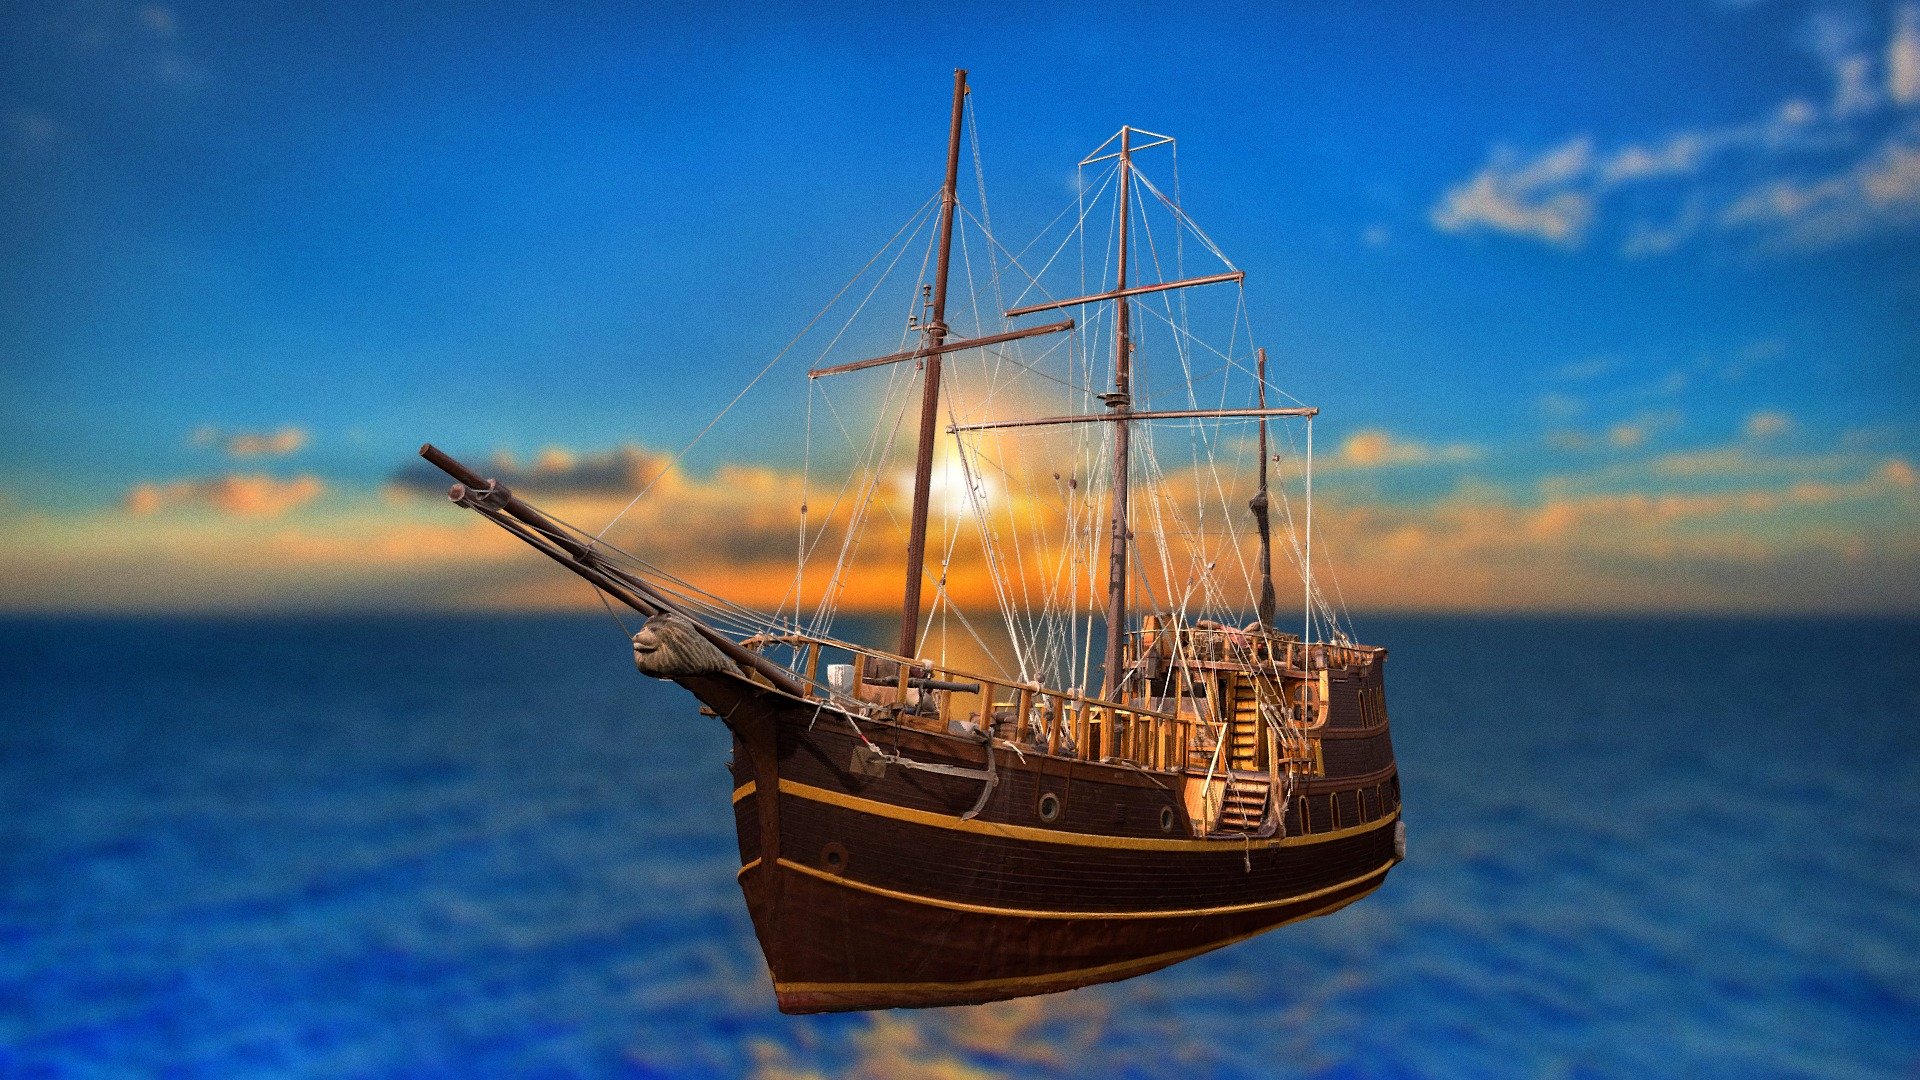 Photogrammetry 3D model created from 2450 images and 12 3D laser scans.

3D scanning and photogrammety by Vektra d.o.o., Varaždin (Croatia) - Sailing ship LAV - 3D model by VEKTRA 3d model